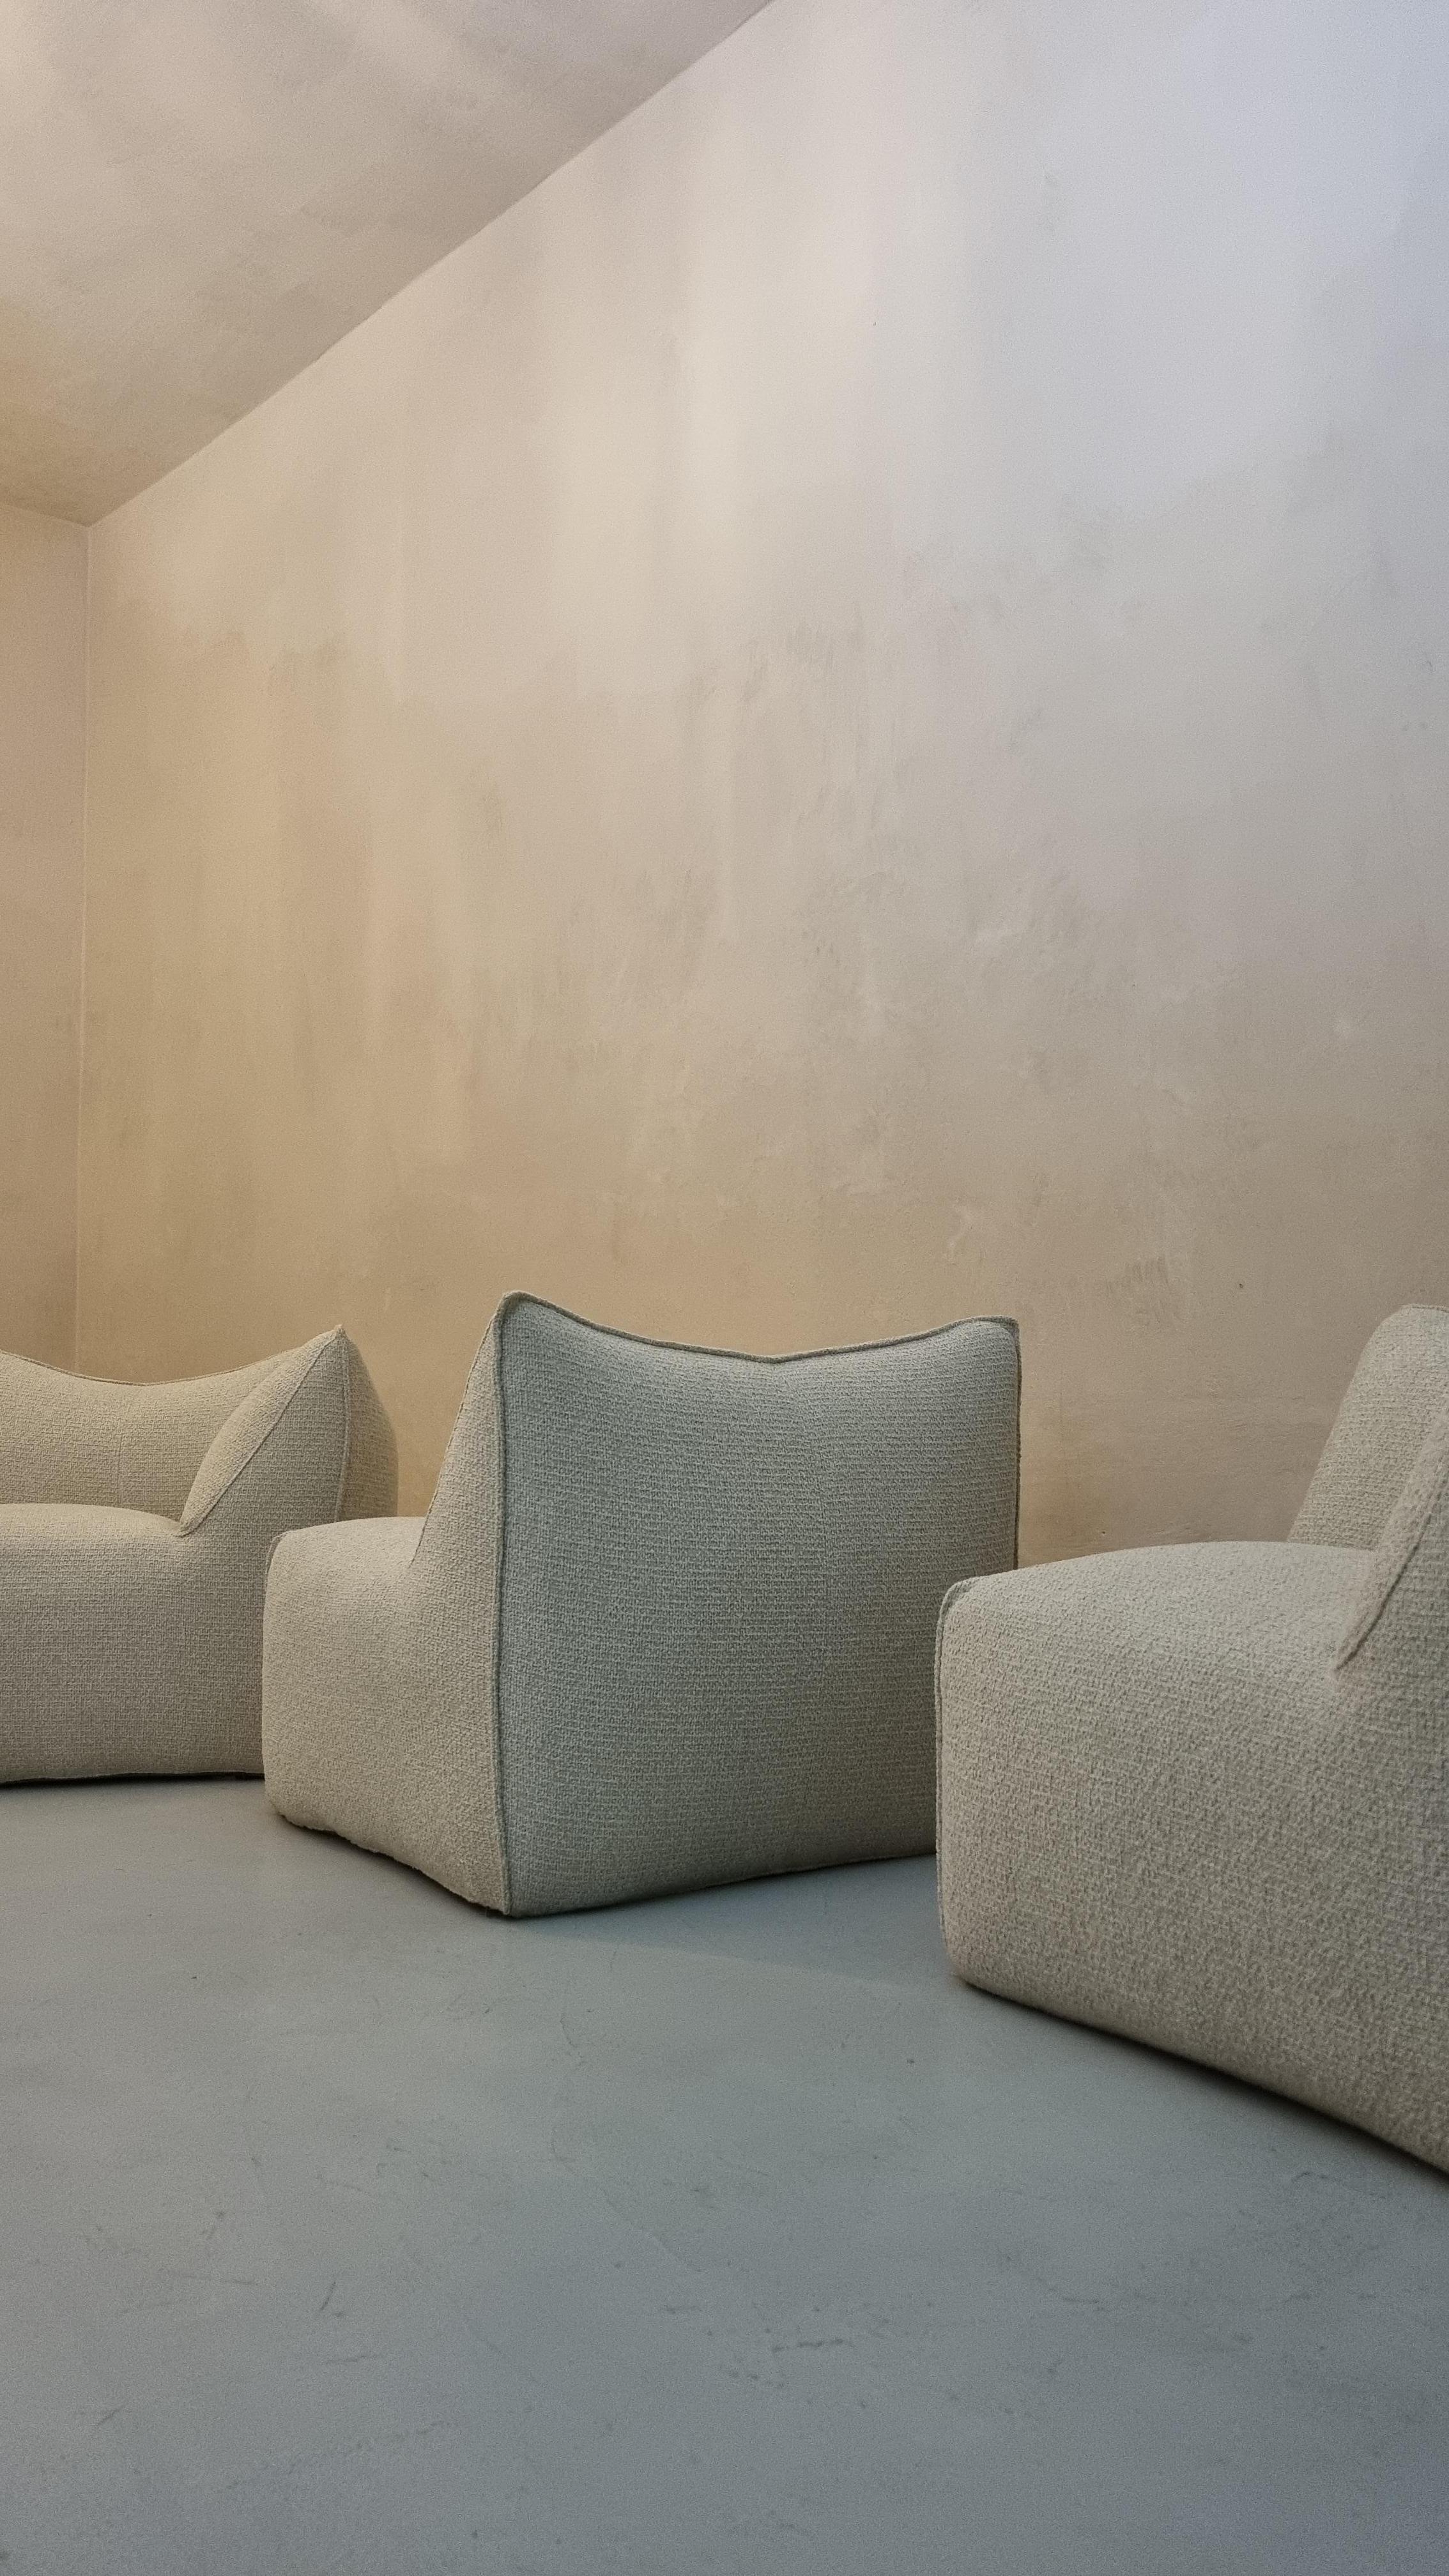 Le Bambole 3 seats sofa designed by Mario Bellini for C&b Italia , the Bambole series won the Compasso d'Oro award in 1979, reupholster in bouclè fabric, Le Bambole is an iconic piece of Italian design.   included in the permanent collection of the